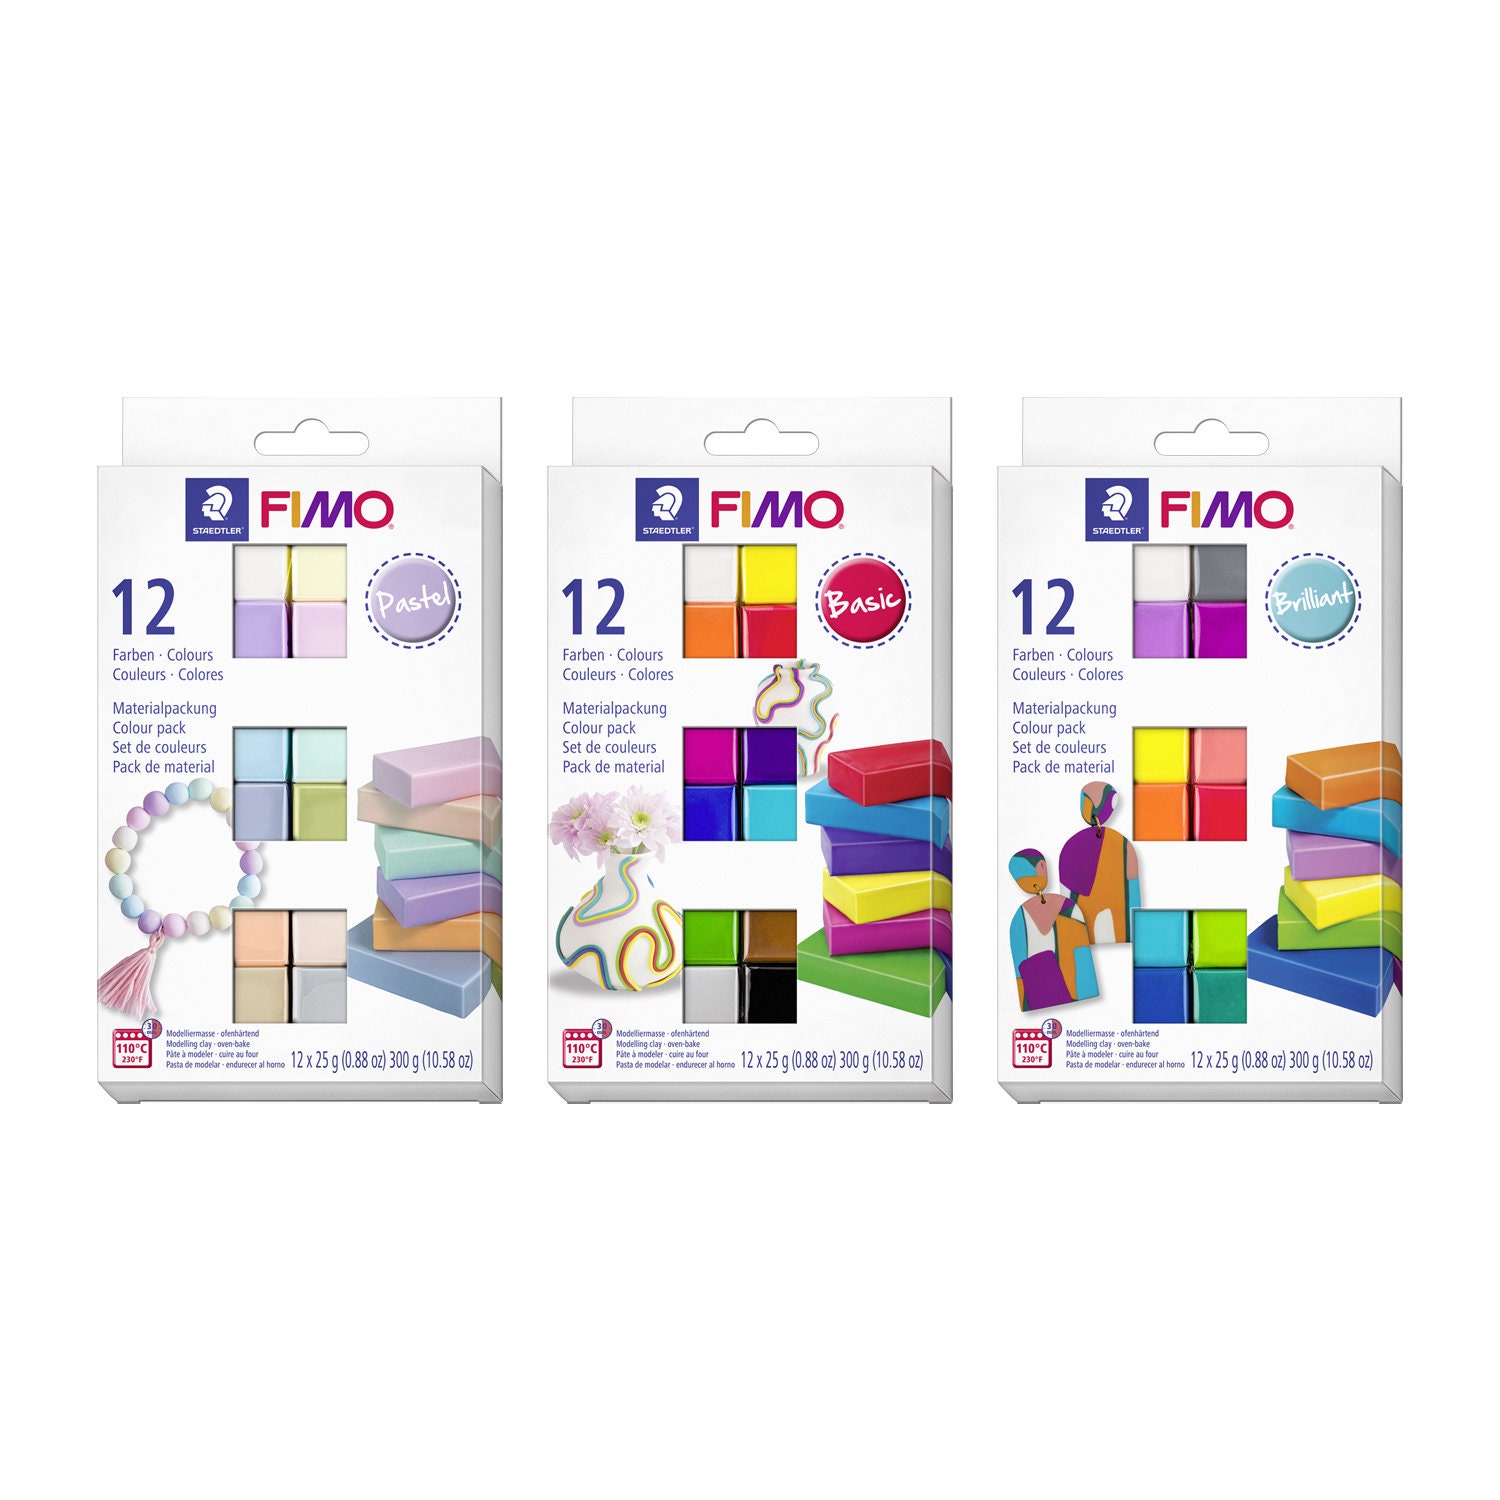 FIMO Varnish, Gloss, With Brush, 10ml, Finishing and Transparent